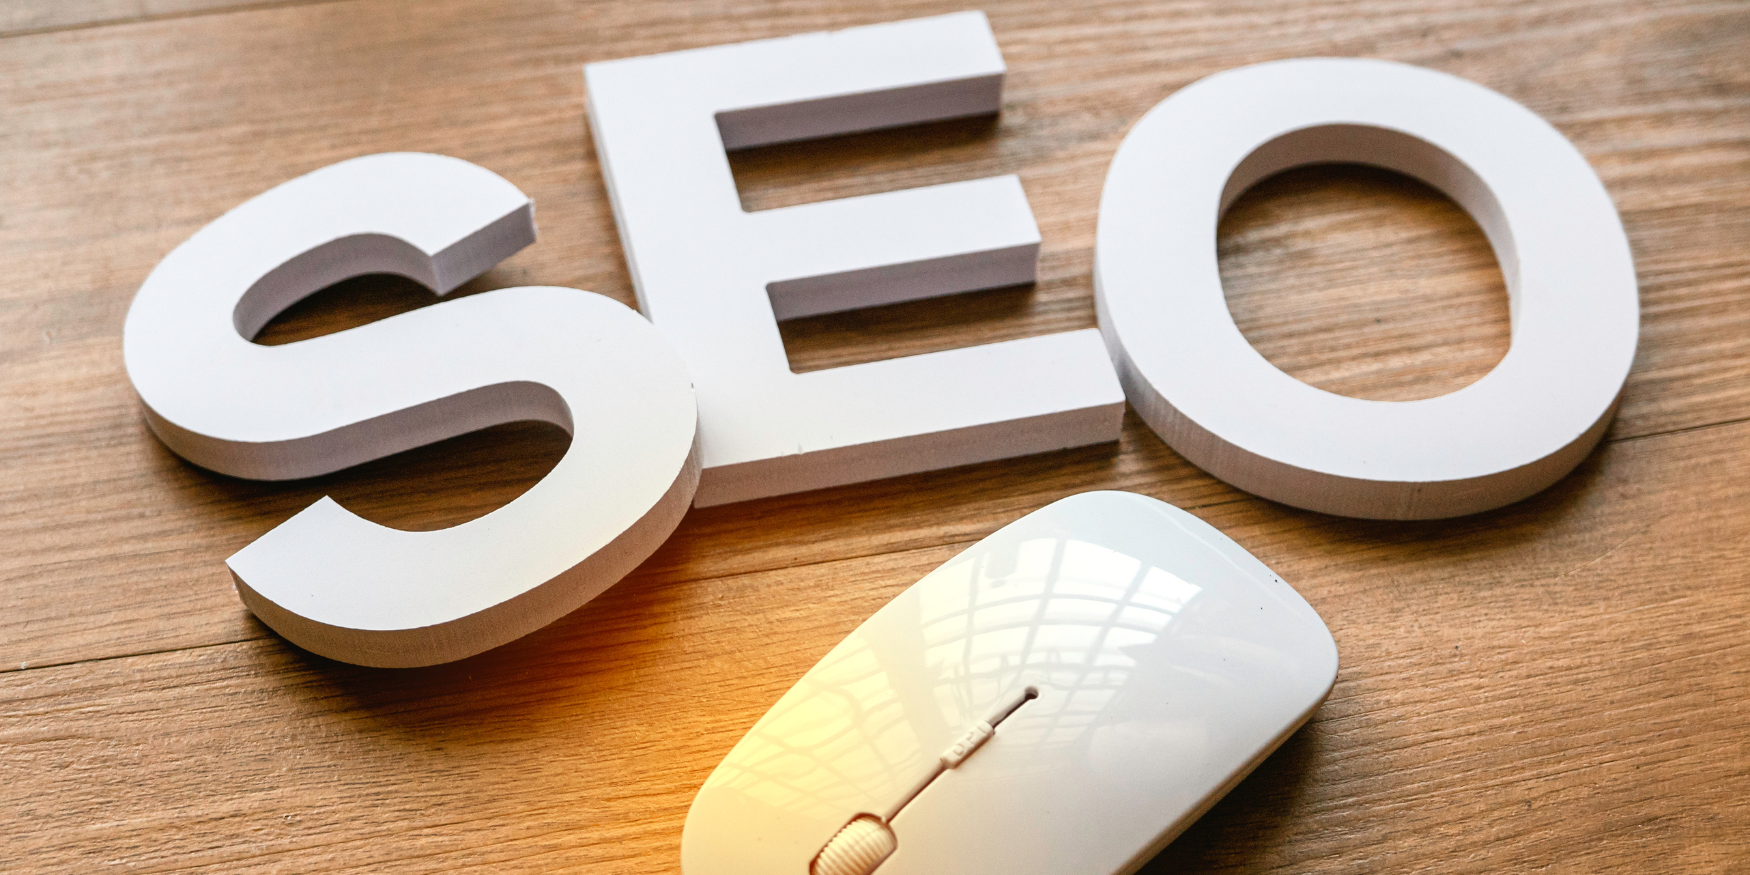 Don't Do These 5 Things For Your Website's SEO